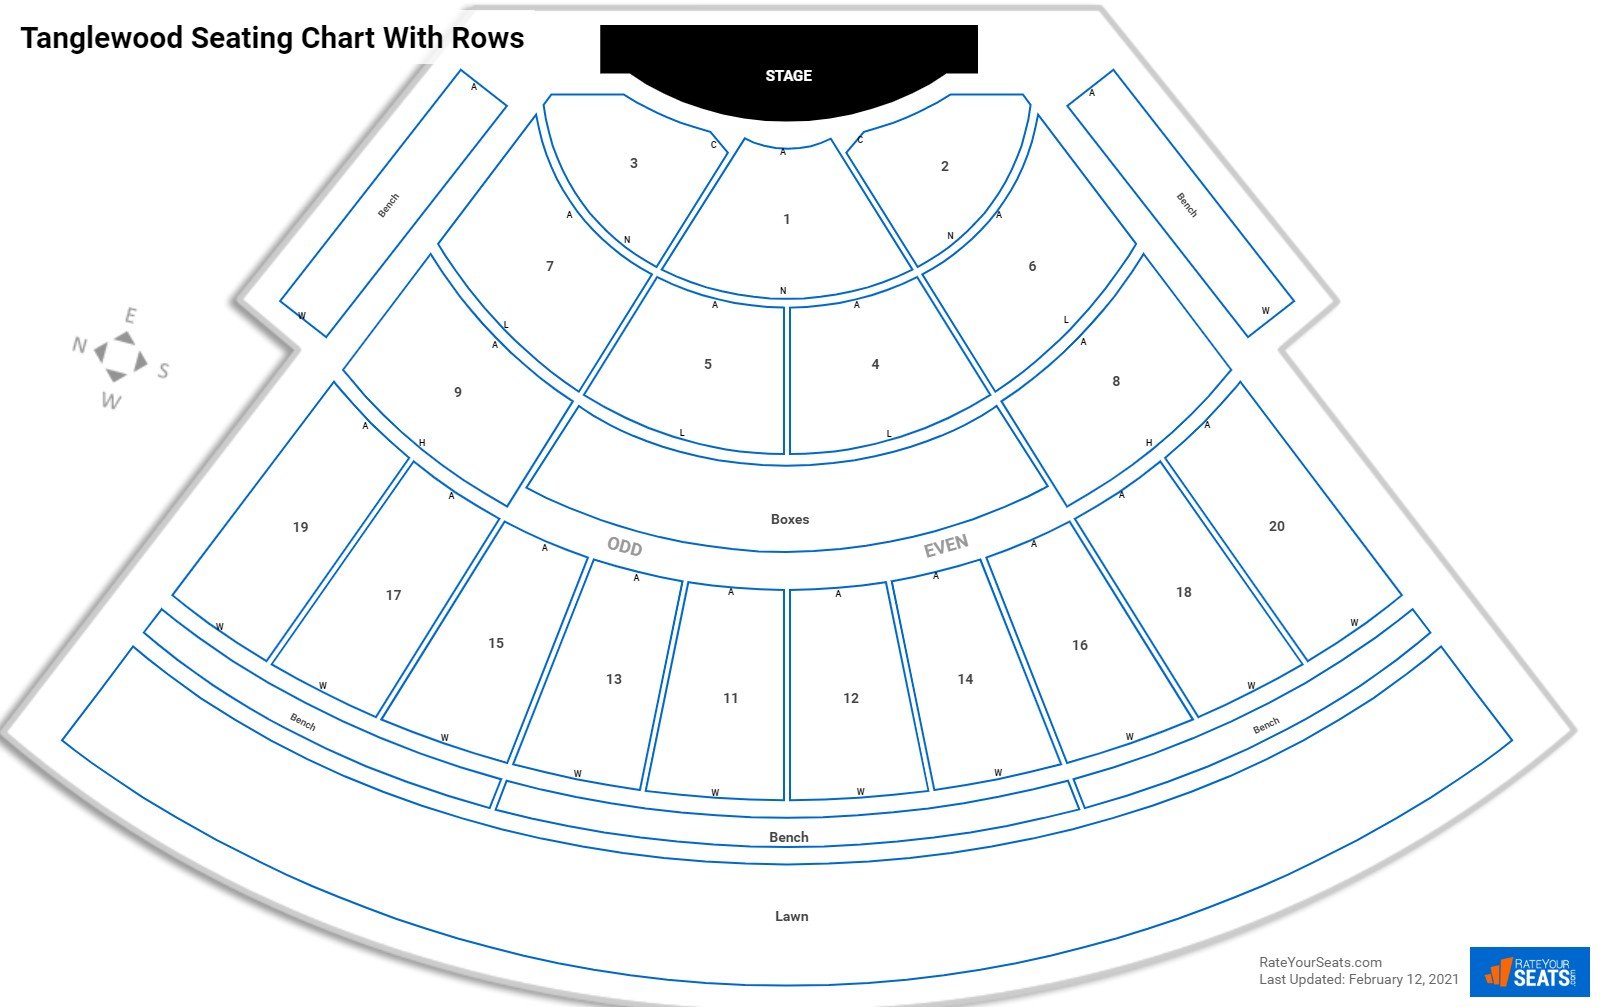 Tanglewood seating chart with row numbers